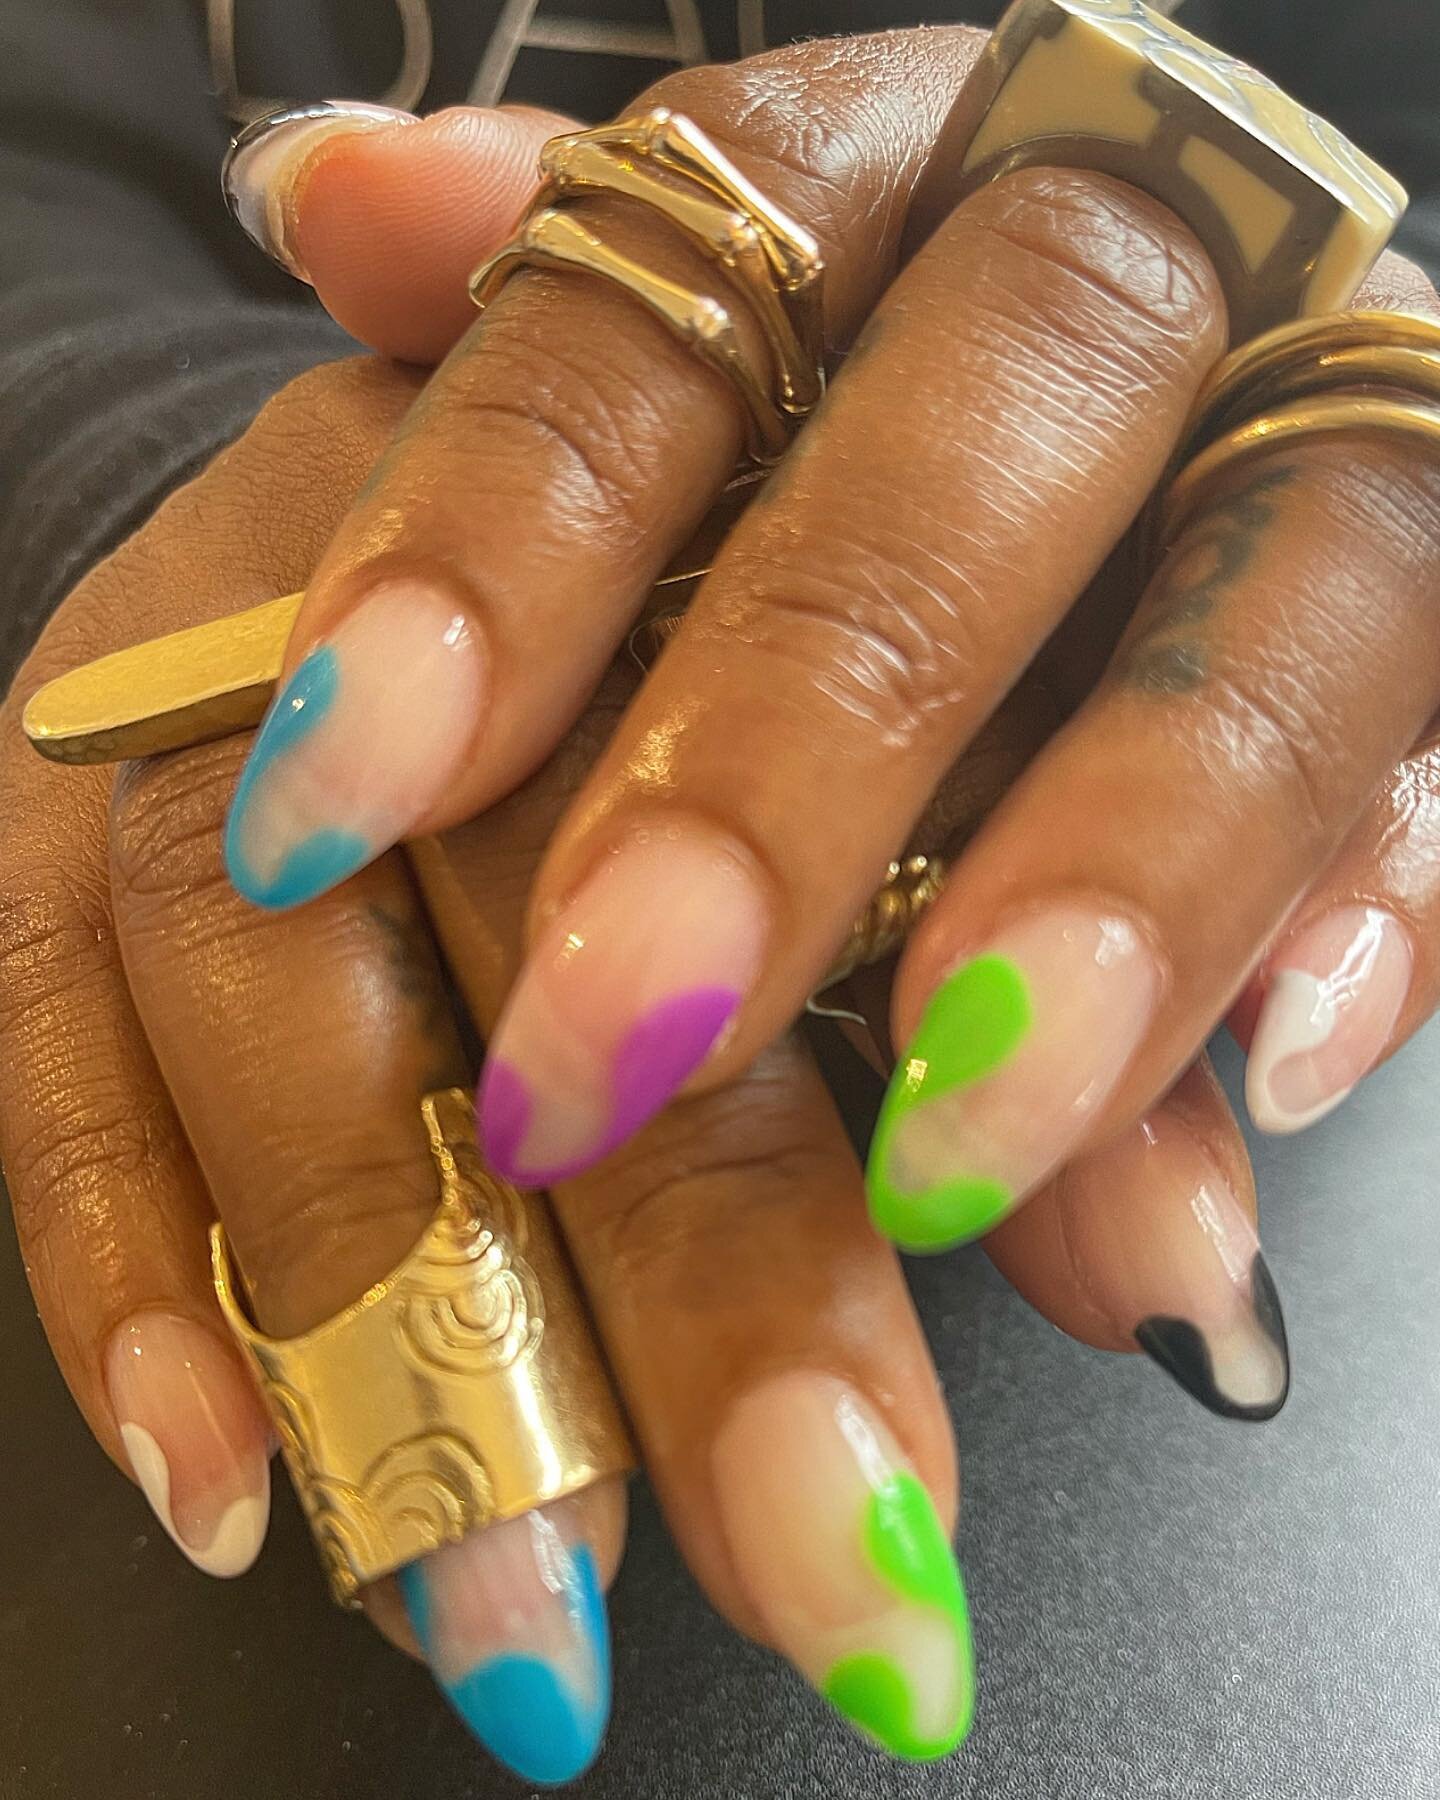 Polygel full set w/ art. Winter vaca nails. 

-There&rsquo;s a few slots open this week and next. 
Book while you can to get right for the new year. NYE slots available also. 
‼️Book online or Text 929-500-5175‼️

🚨Don&rsquo;t forget to take advanta